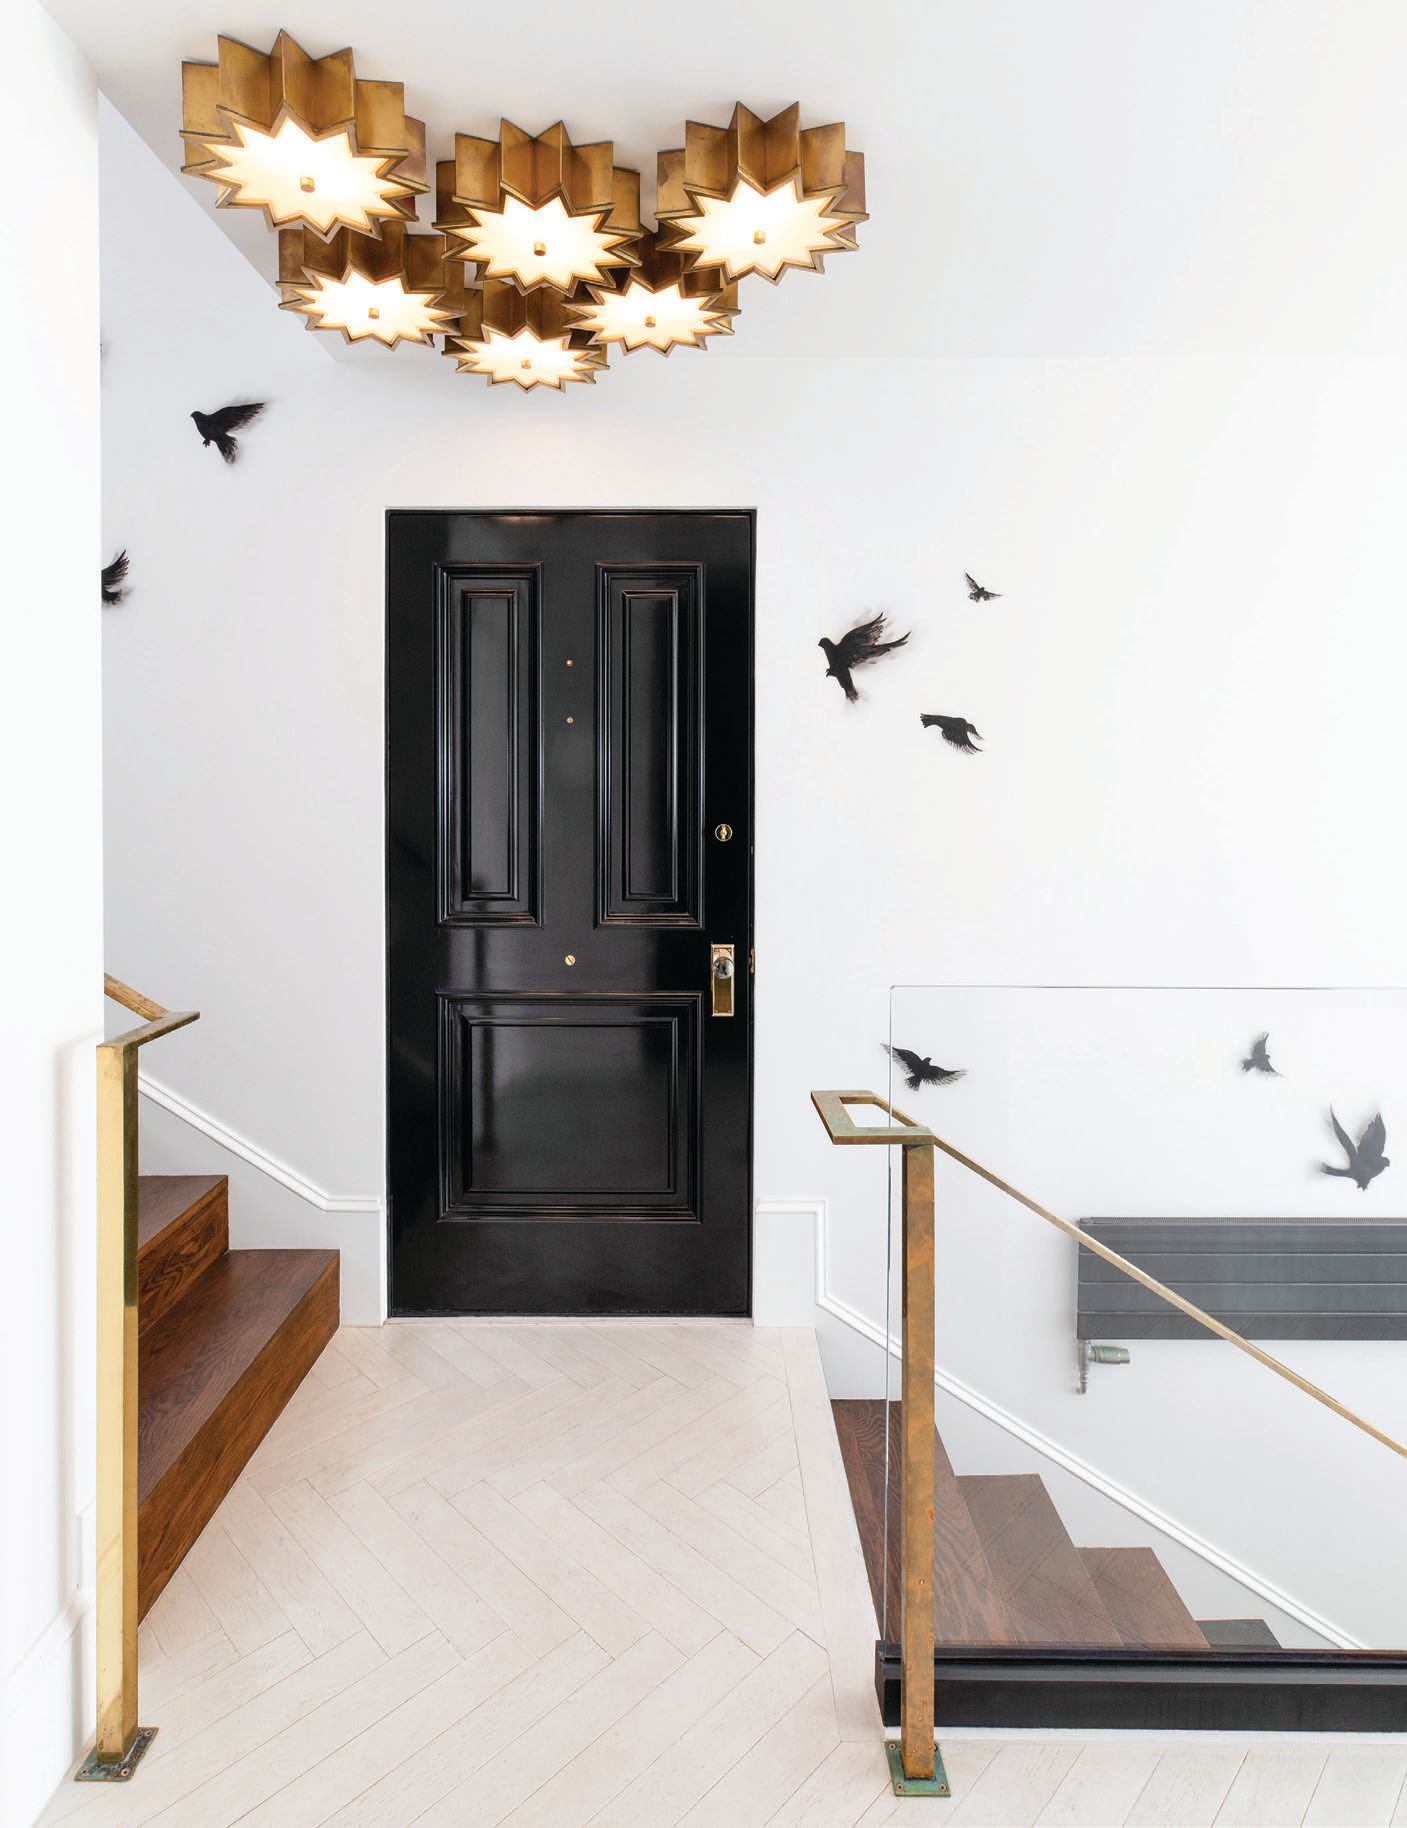 A light fixture from Visual Comfort illuminates the stairwell, where hand-painted birds by artist Cassandra Schramm fly freely. PHOTO BY JENNY SIEGWART 